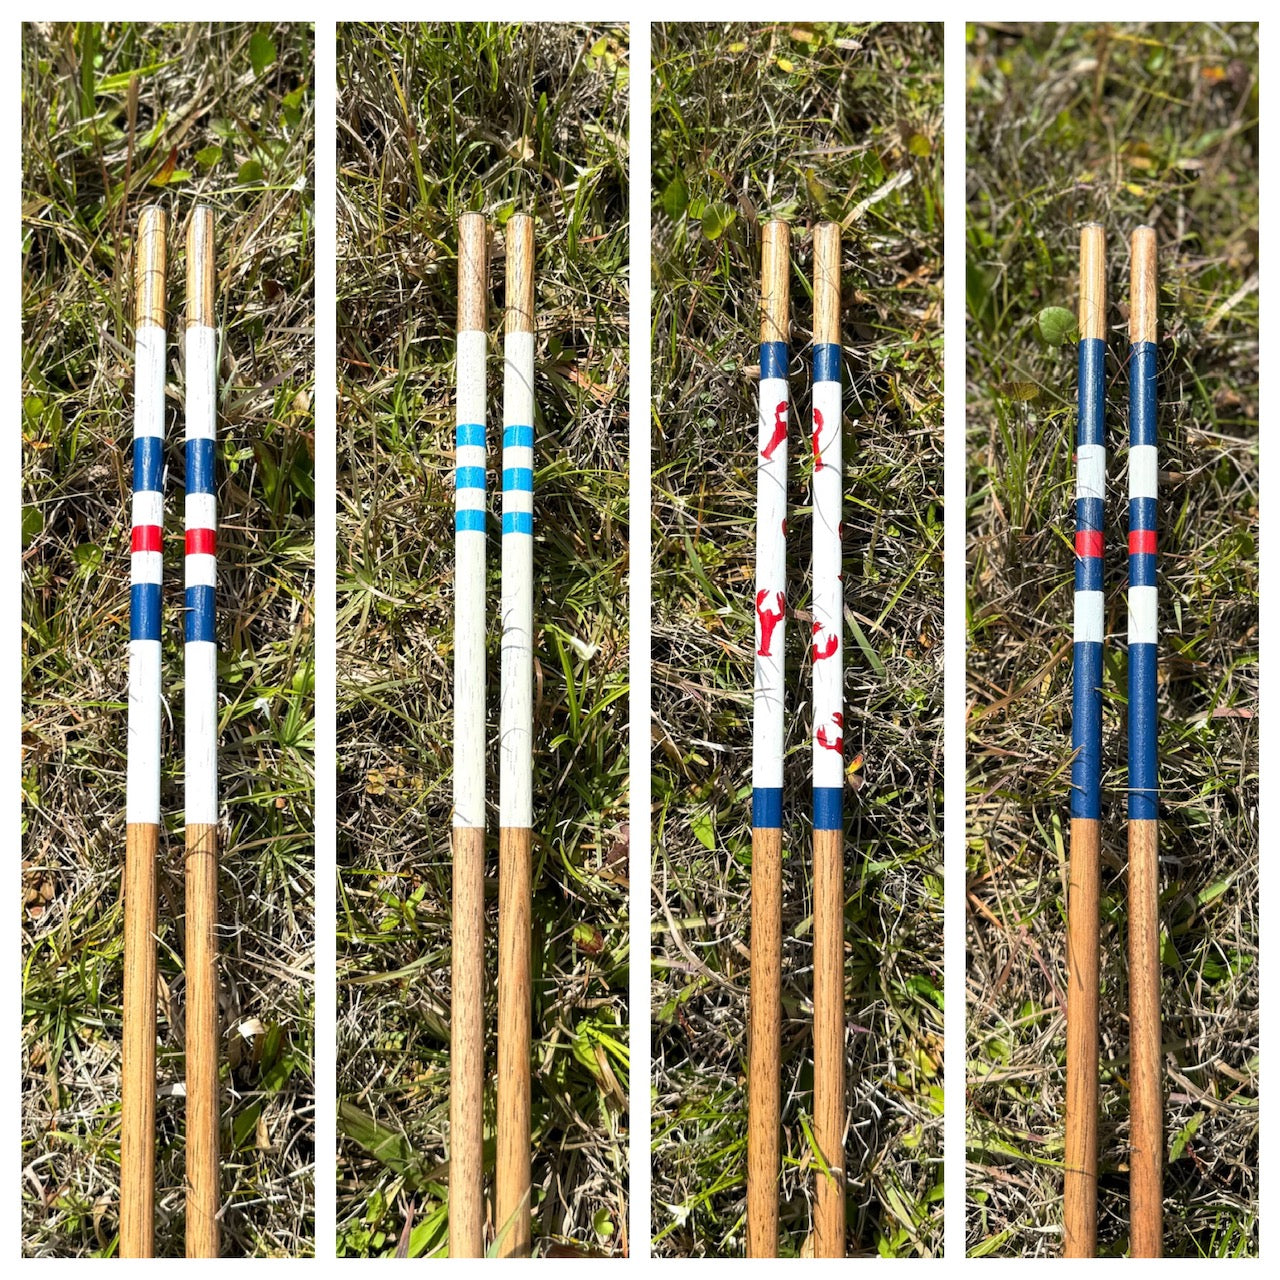 Nor'easter Sticks Handcrafted Hickory Wood Golf Alignment Sticks w/ Cover (Pair)